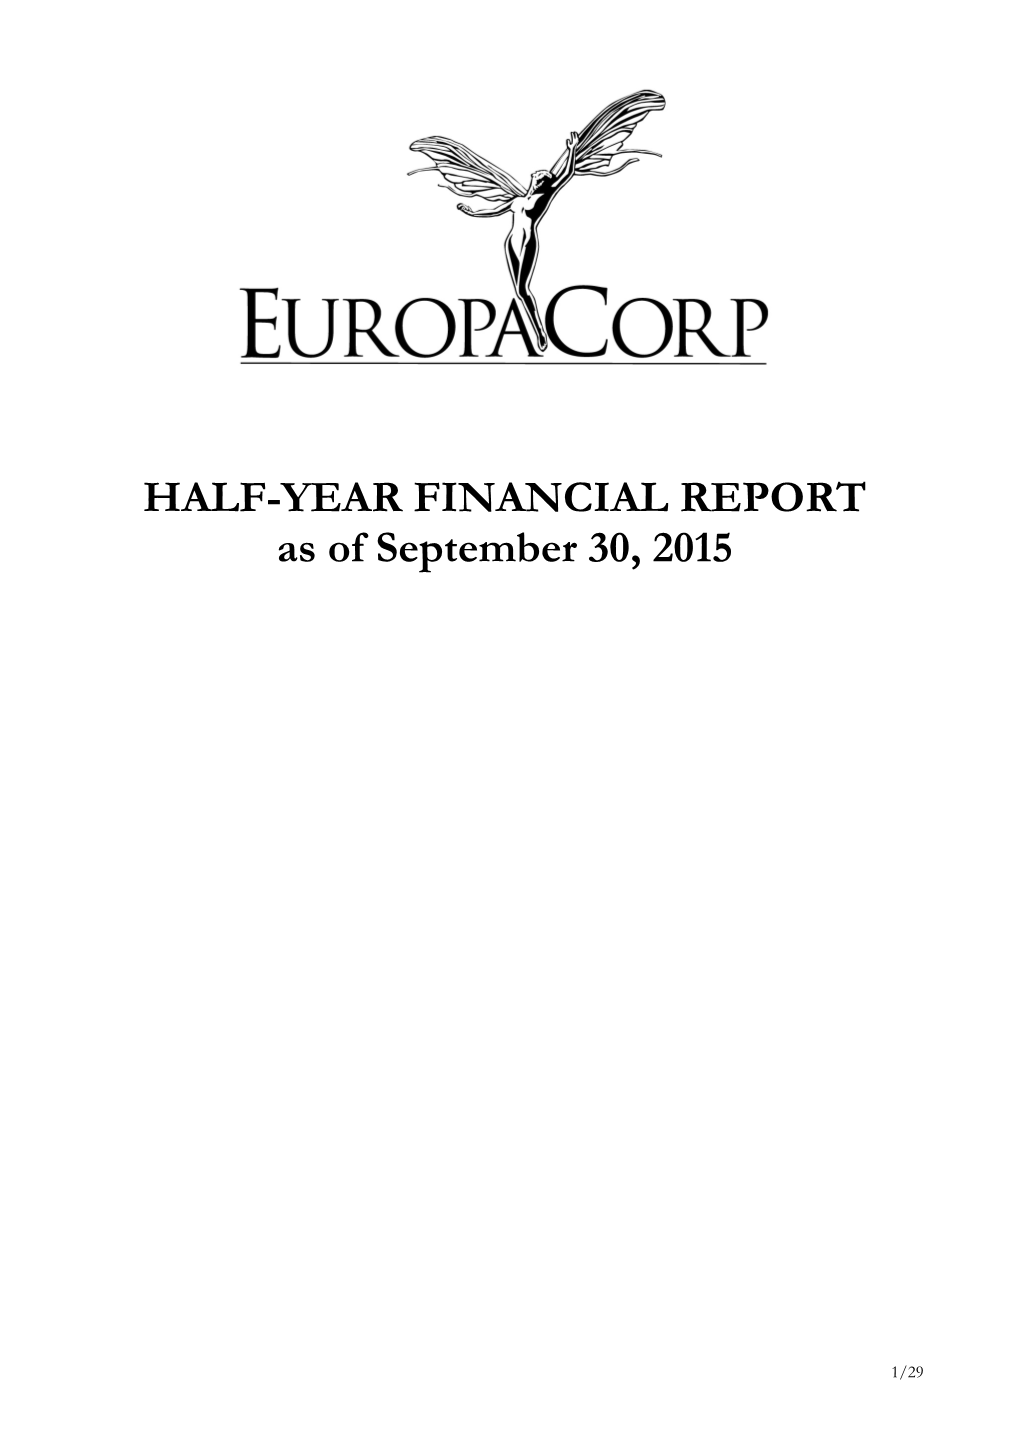 HALF-YEAR FINANCIAL REPORT As of September 30, 2015